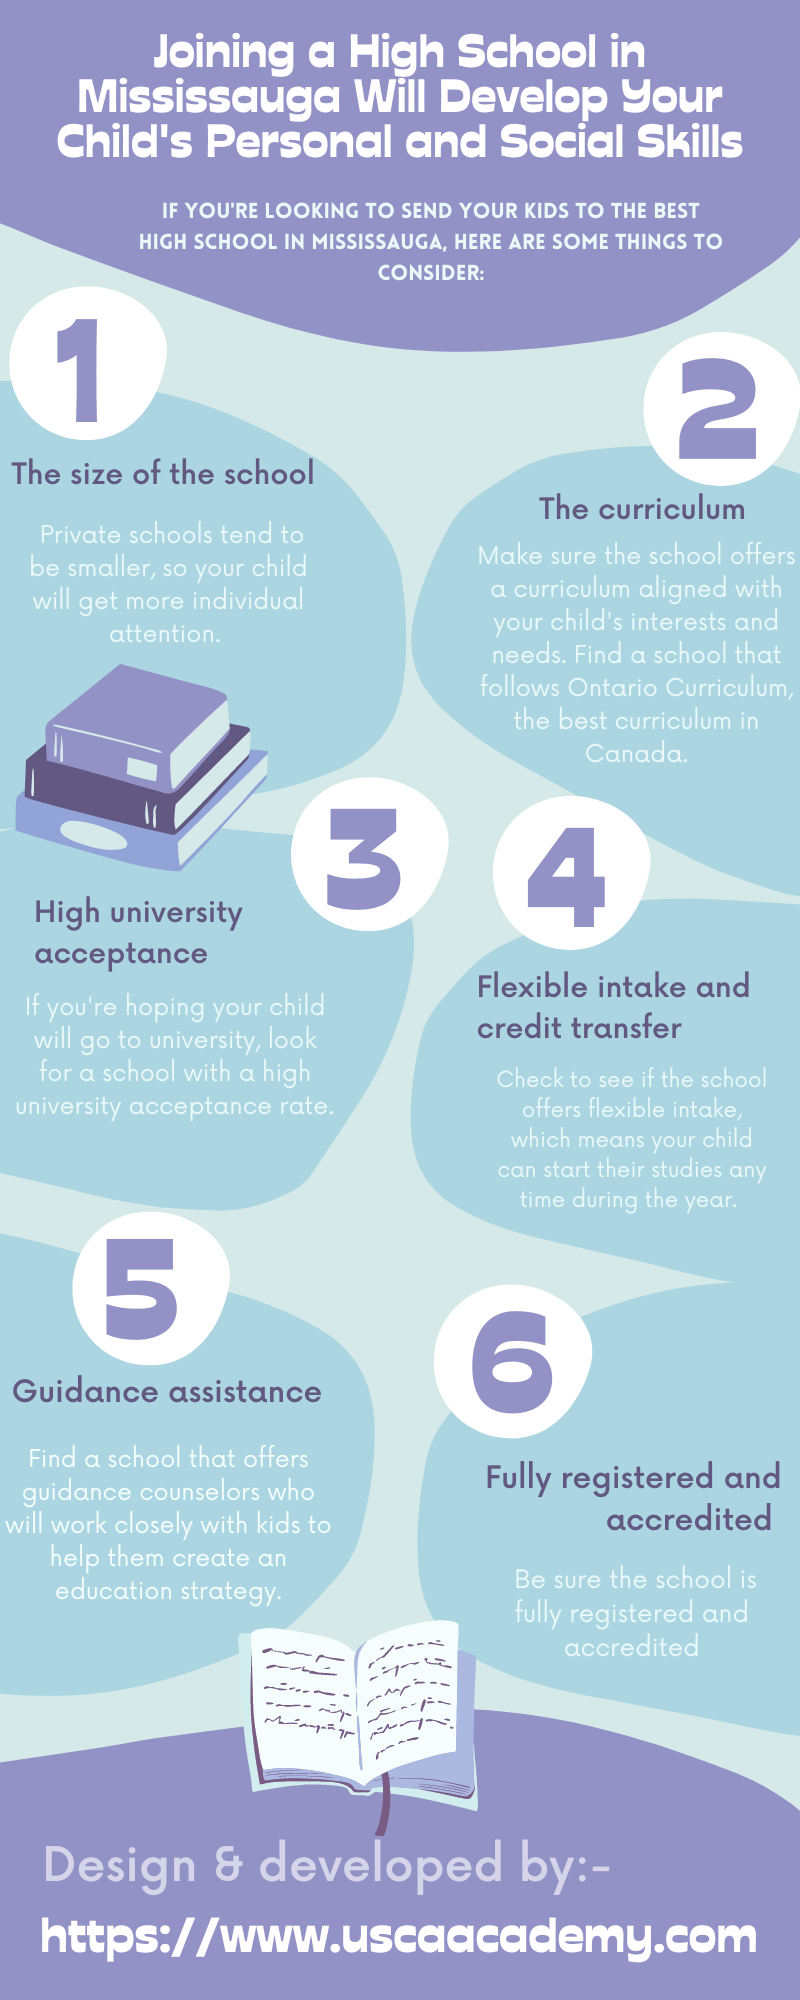 Joining a High School in Mississauga Will Develop Your Child's Personal and Social Skills https://www.uscaacademy.com/private-school-mississauga/ by uscaacademy